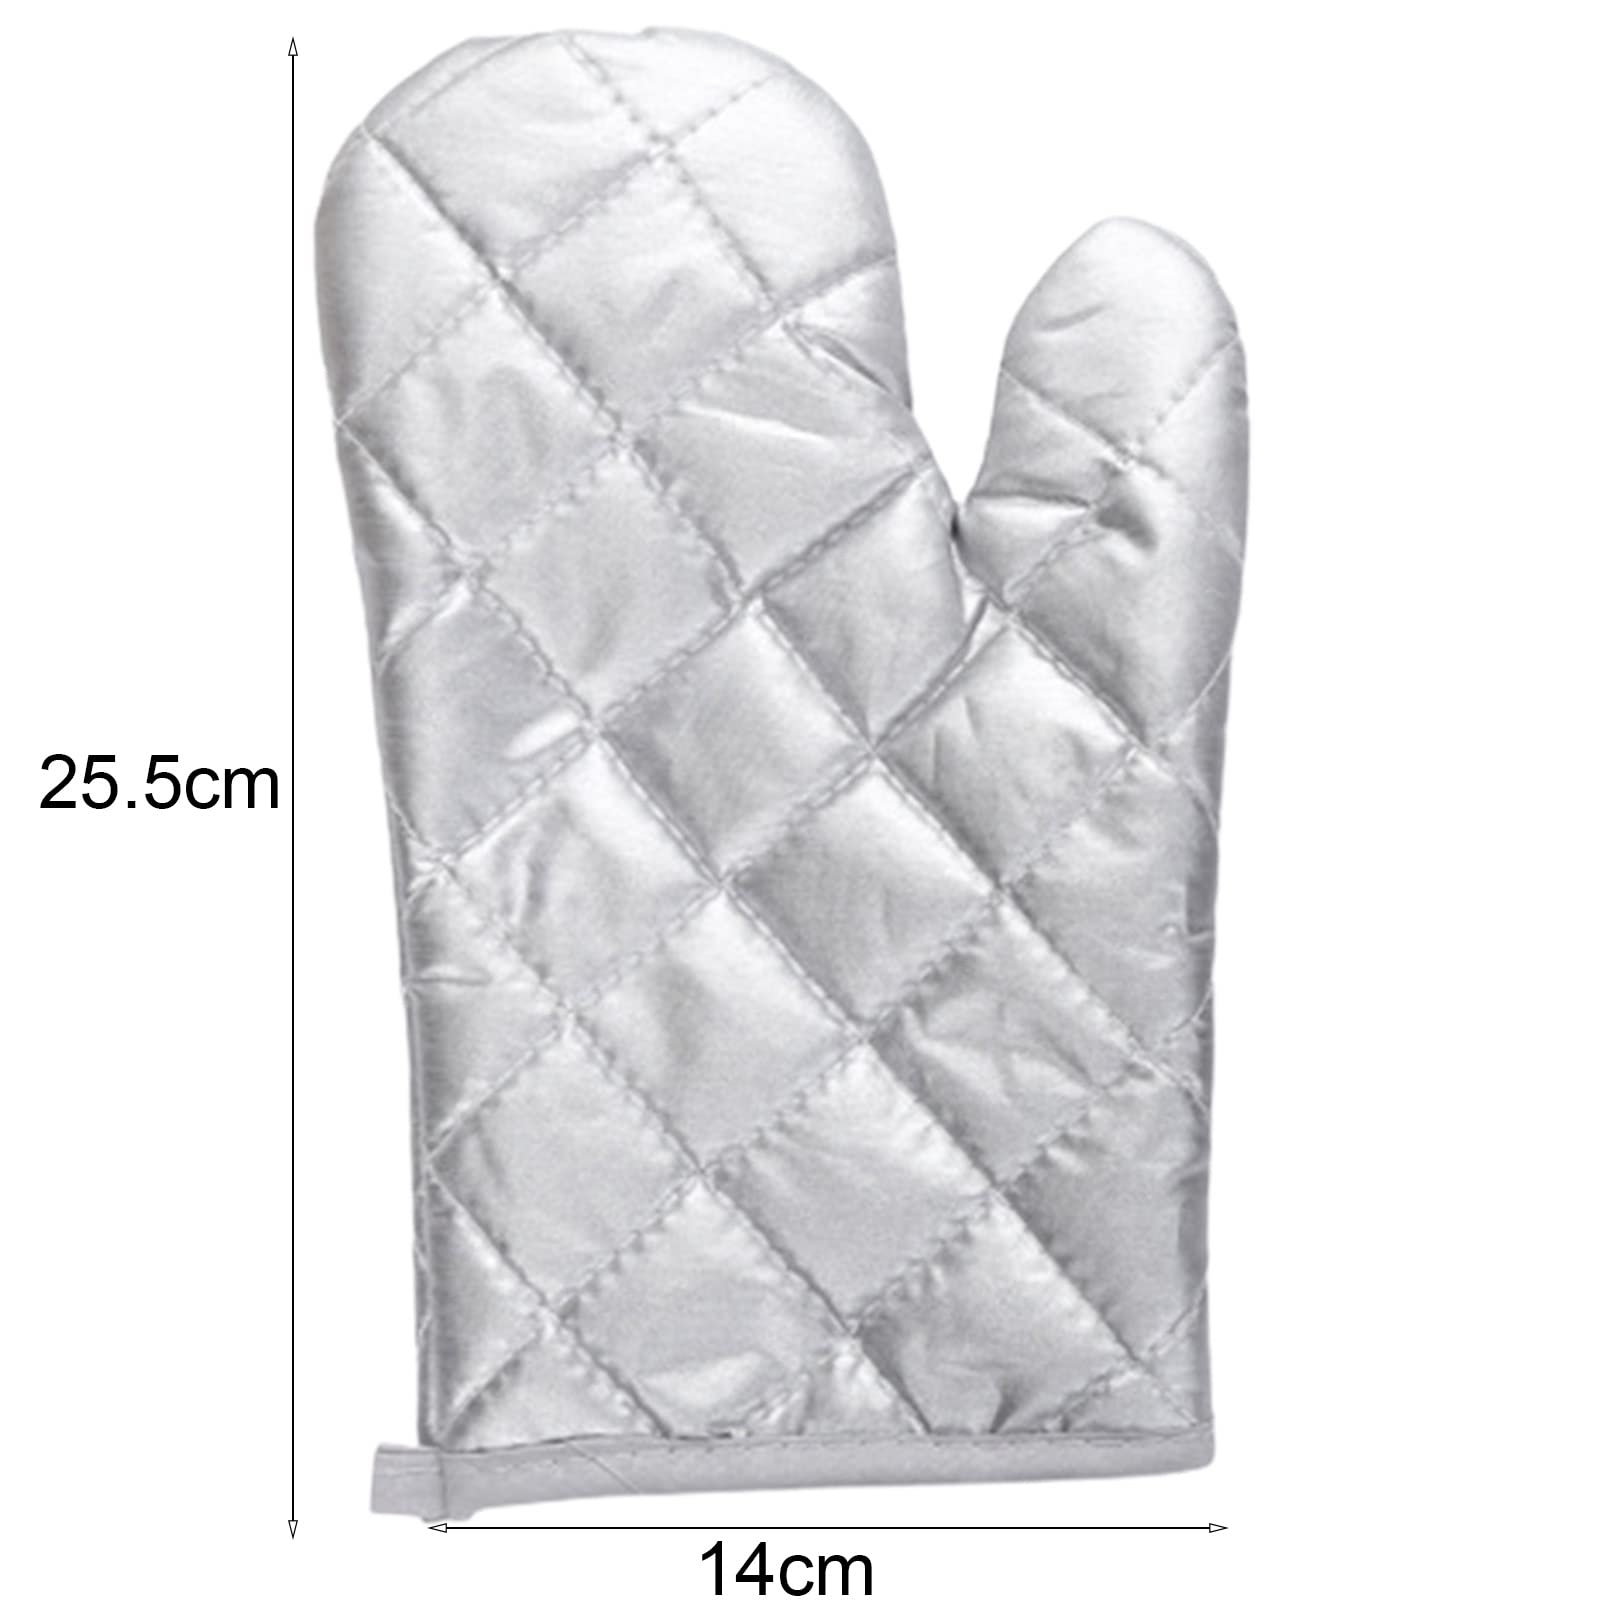 1 Pc Oven Mitts,Baking Gloves Anti-scalding Oven Gloves Thickened Breathable Heat Insulation Non-Slip Kitchen Mittens for Cooking Baking Barbecue BBQ Microwave Silver 10.04" x 5.51"